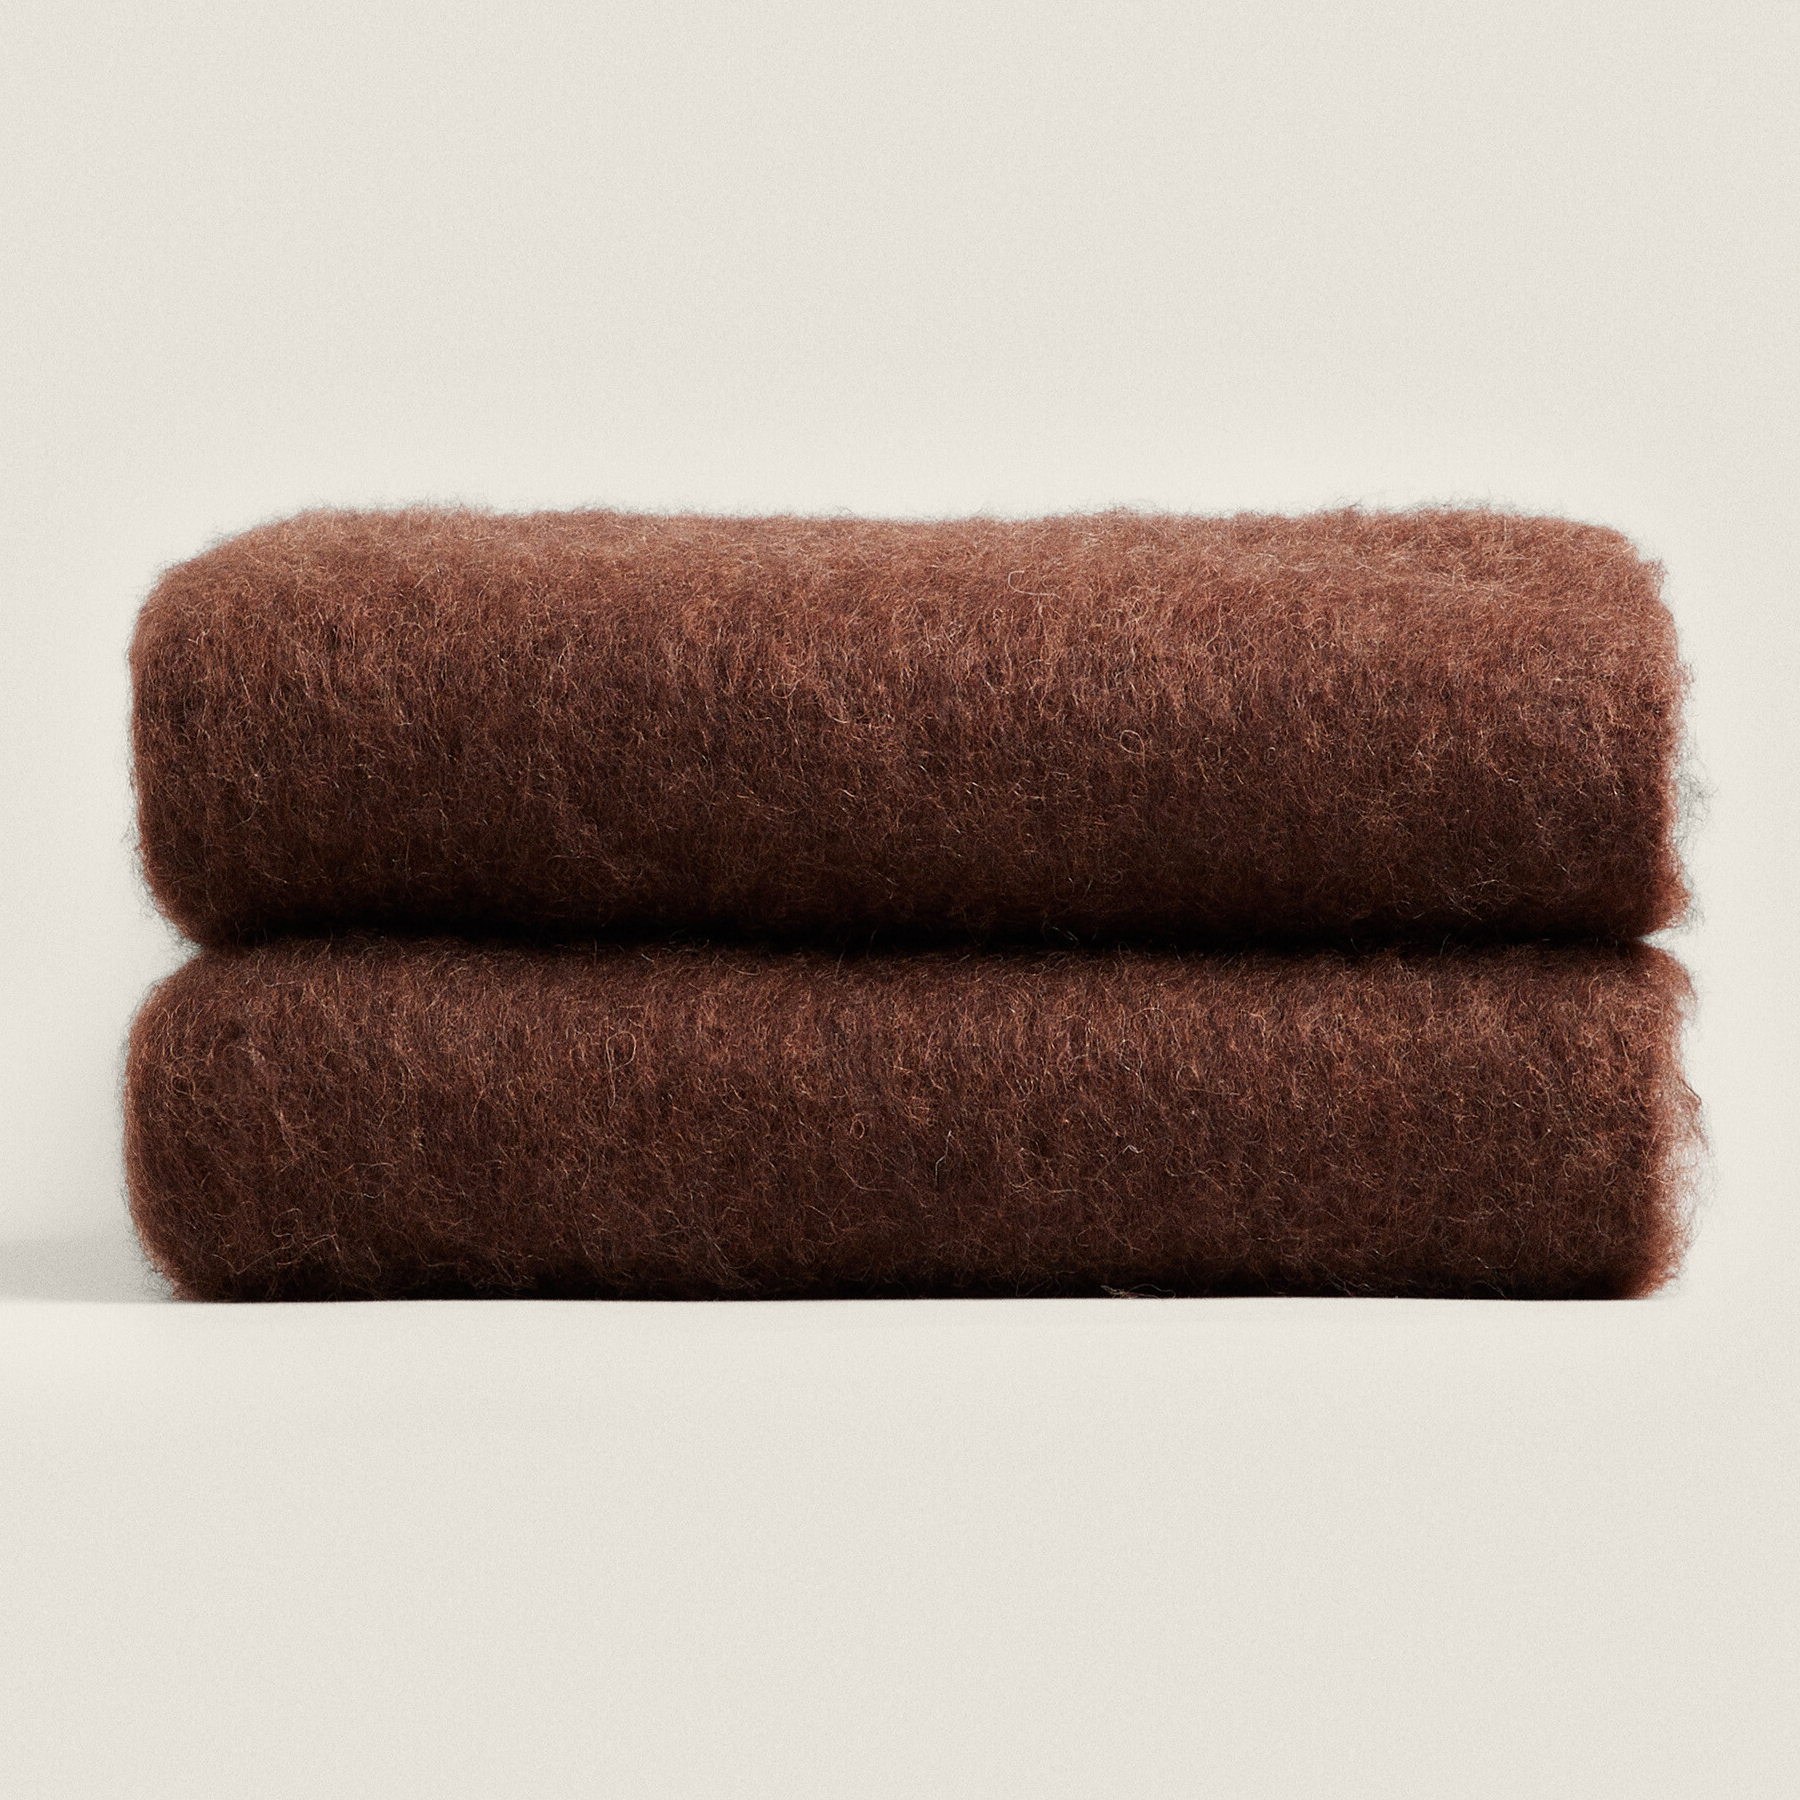 Плед Zara Home Carded Wool, коричневый плед zara home piqué wool